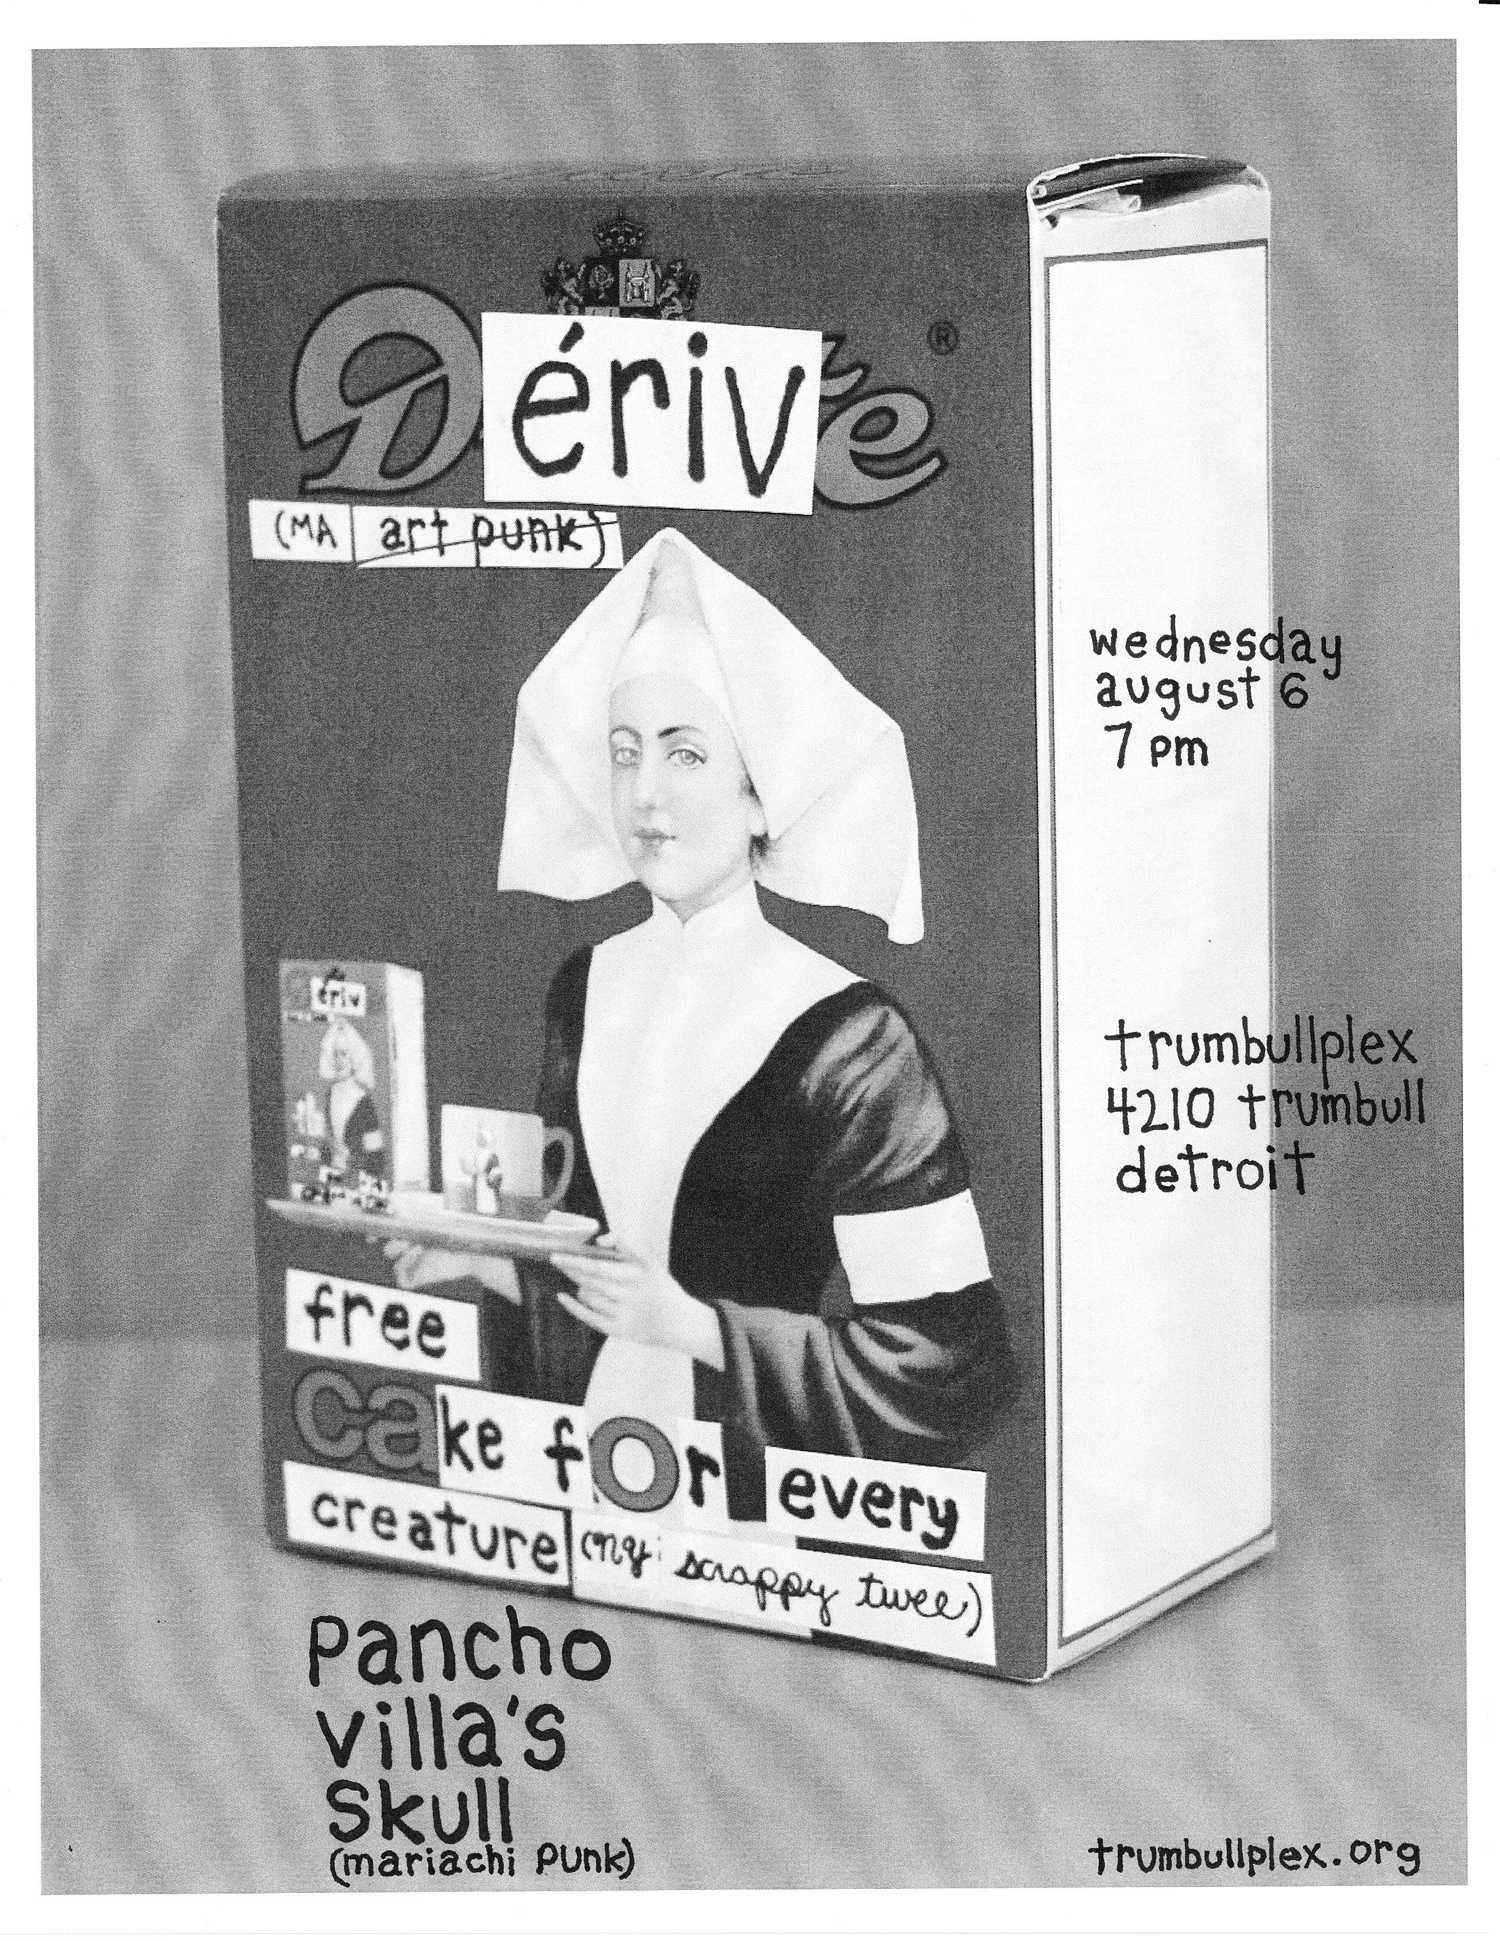 Dérive (MA), Free Cake For Every Creature (NY), and Pancho Villa's Skull: Wednesday, August 6 at the Trumbullplex Derive_flyer